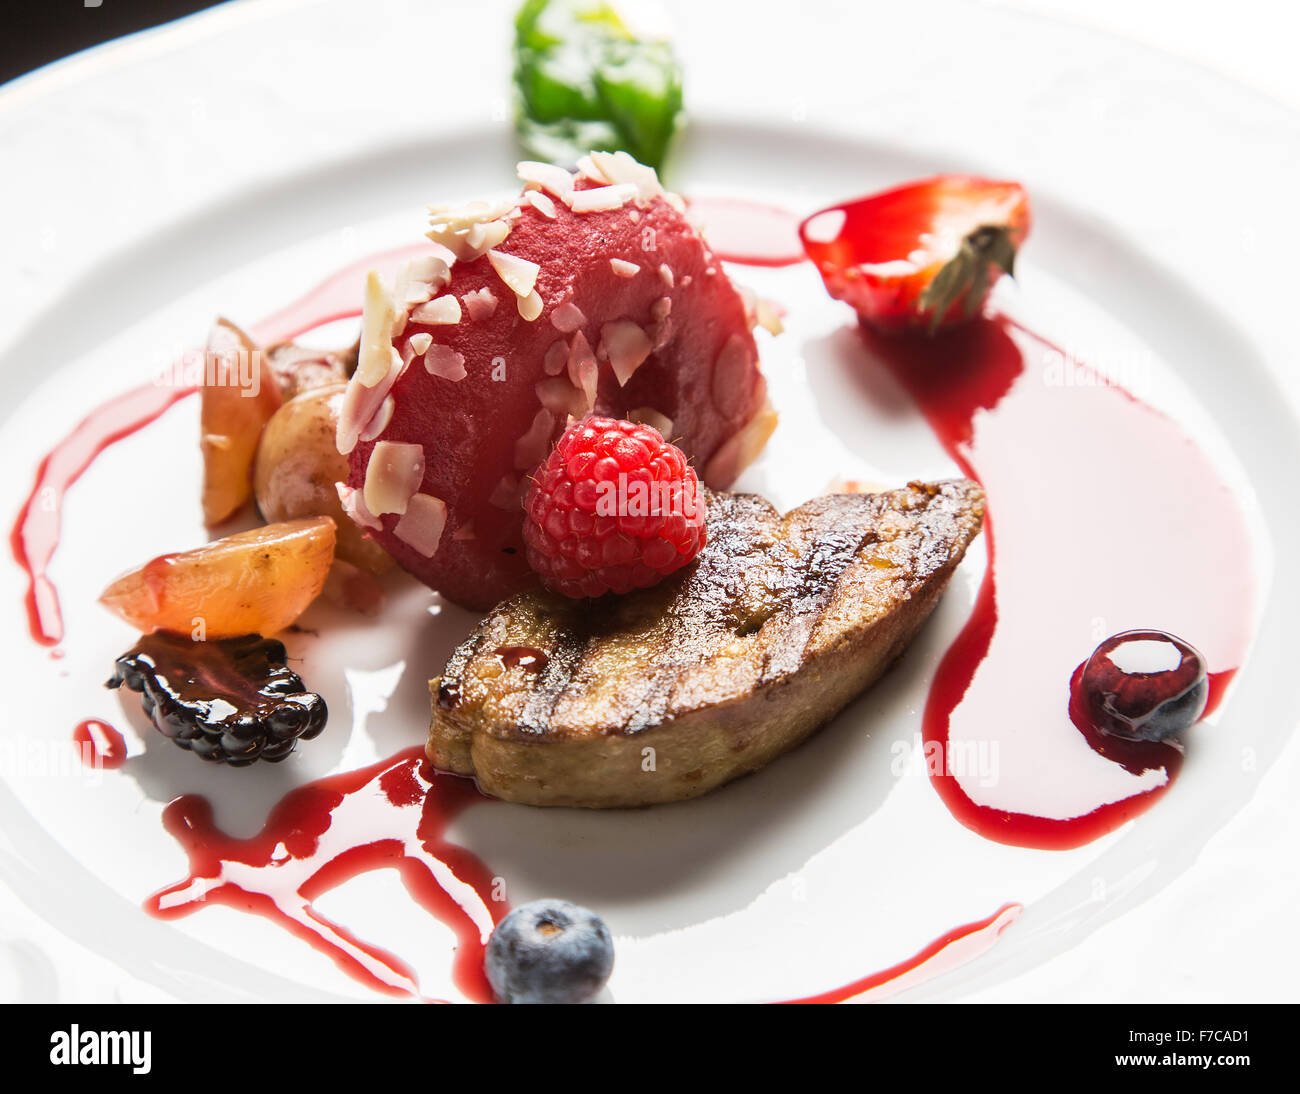 Gourmet appetizer: foie gras with berries. Stock Photo